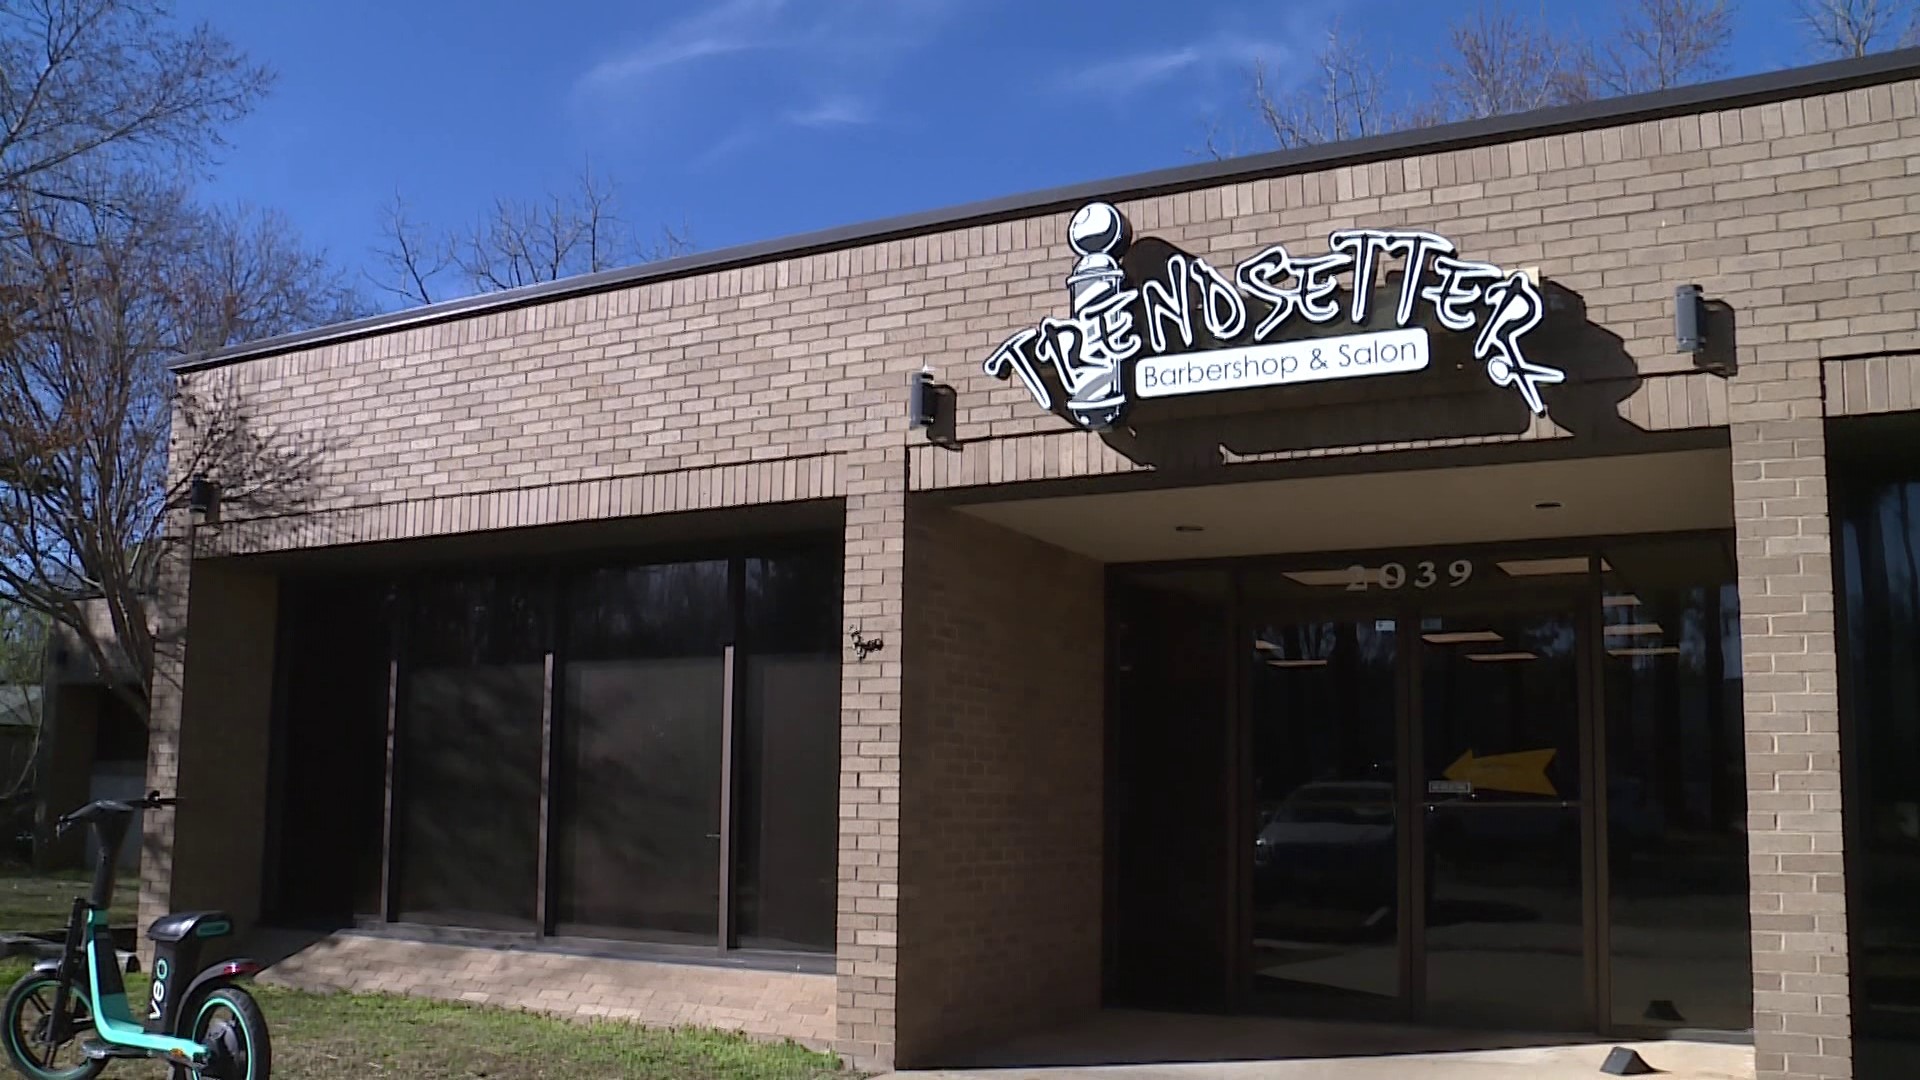 Barbershop "Trendsetters" is eager to showcase what it means to own, operate, and enjoy local Black businesses.